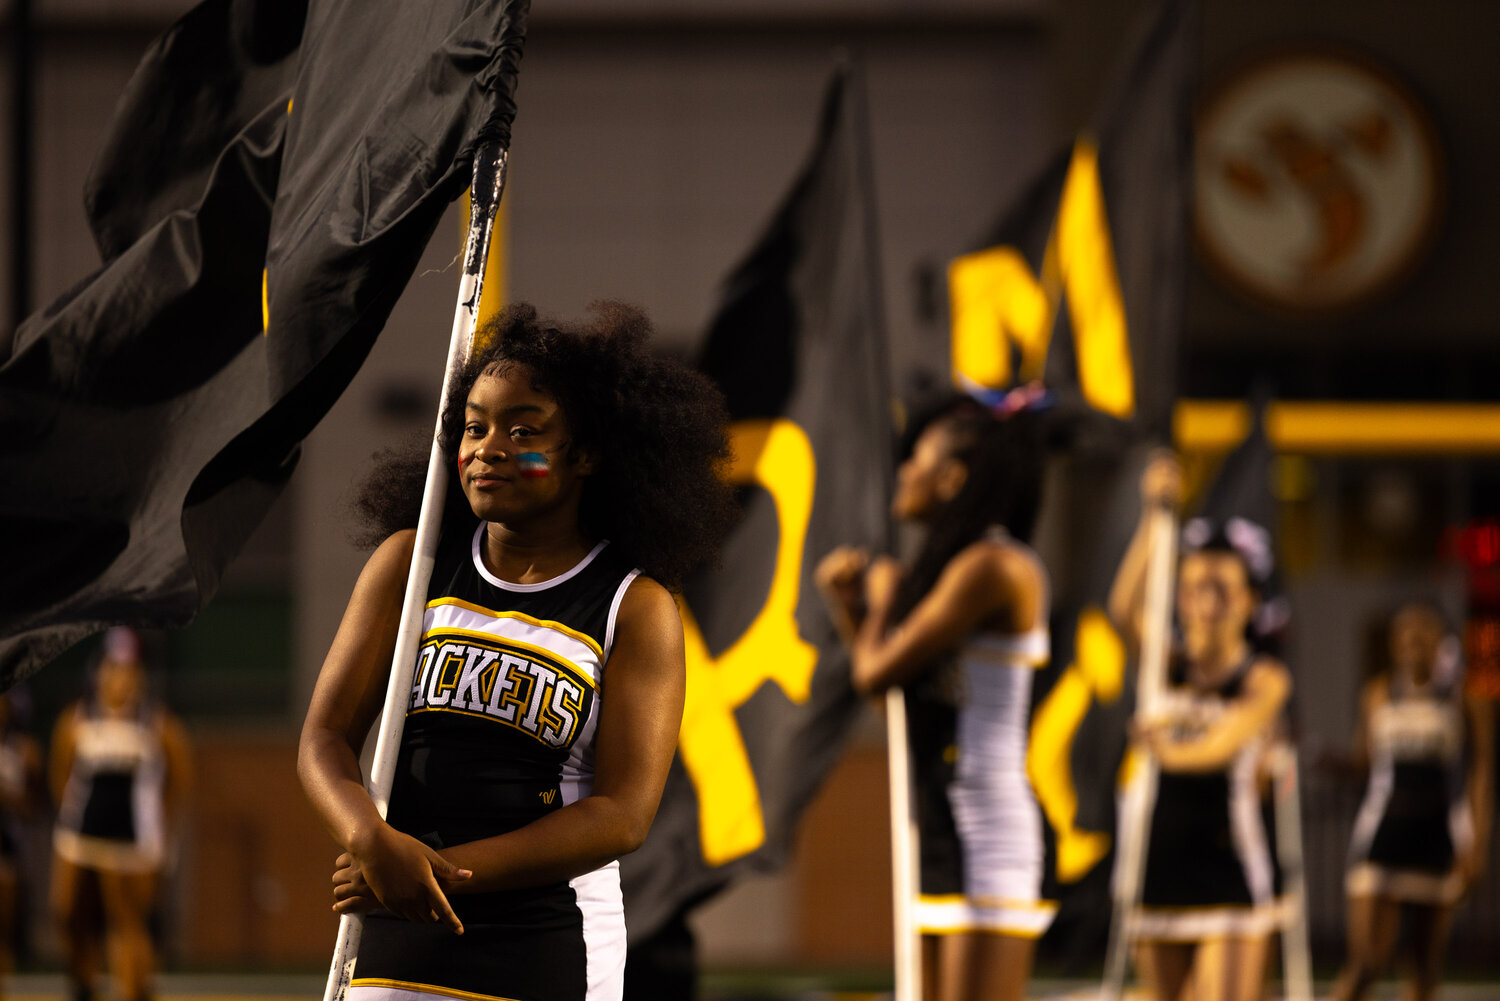 The Airport High School Eagles took on the Irmo High School Yellow Jackets at W.C. Hawkins Stadium. The Yellow Jackets easily handled the Eagles, defeating them 54-0.